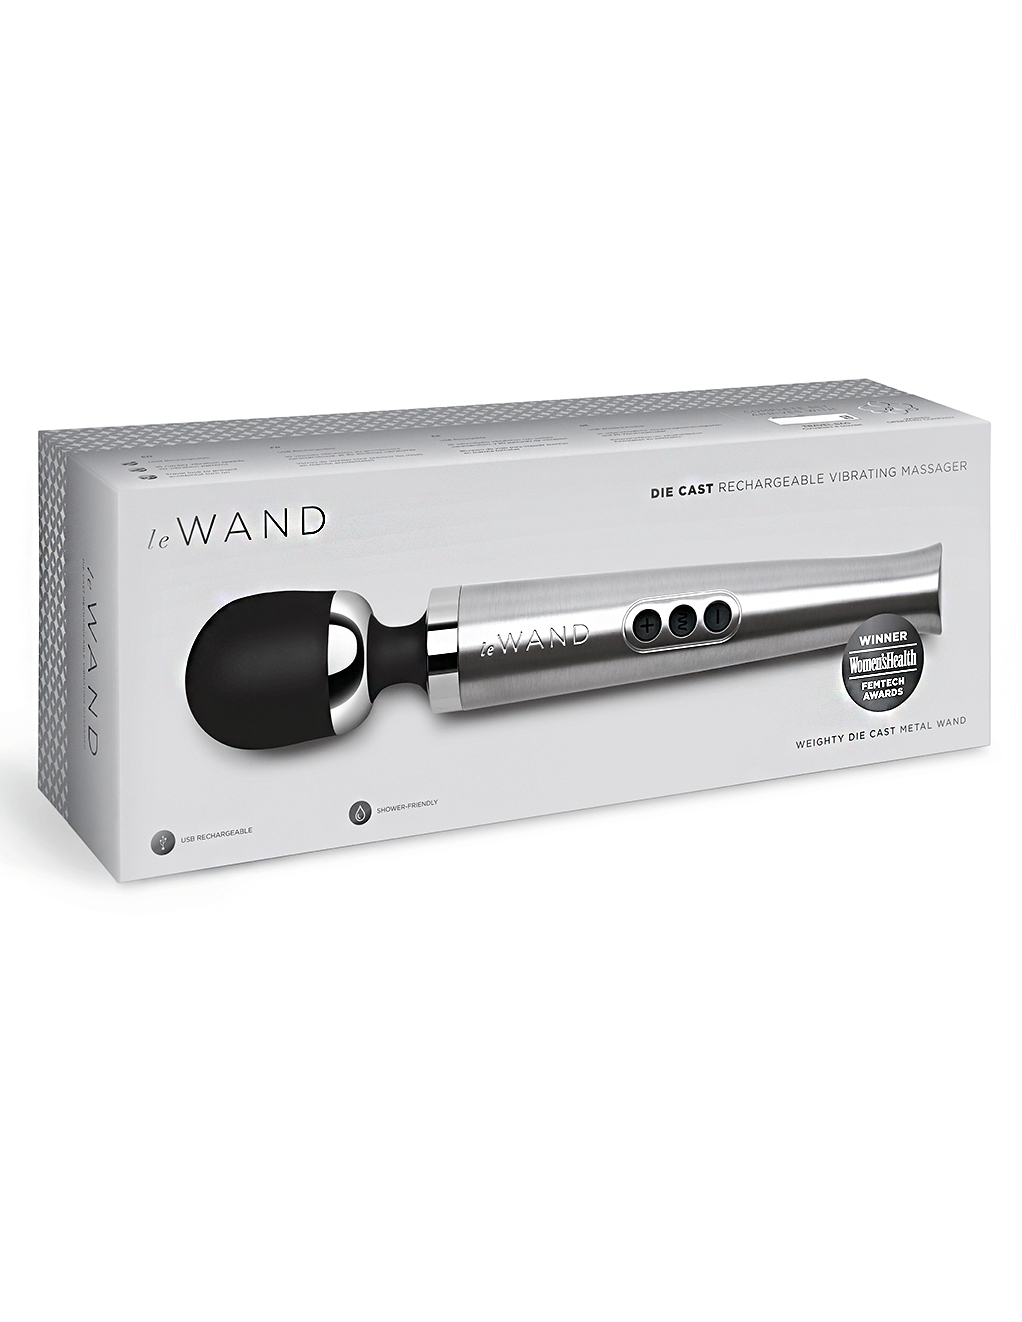 Le Wand Diecast Rechargeable Wand - Silver - Box Front